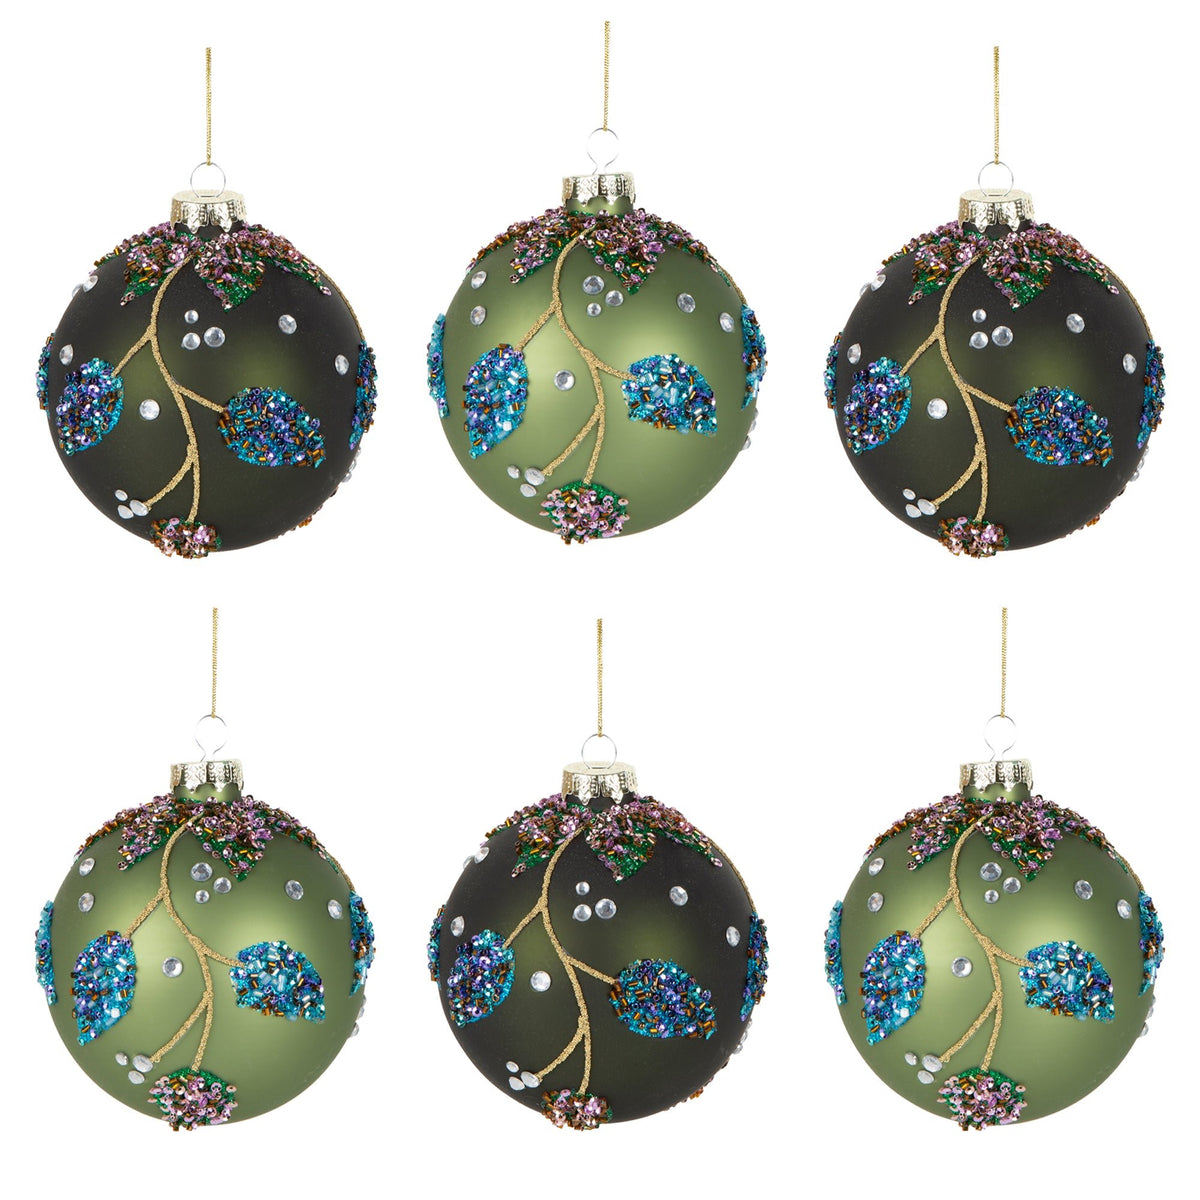 Box of 6 Green Ornaments - My Christmas